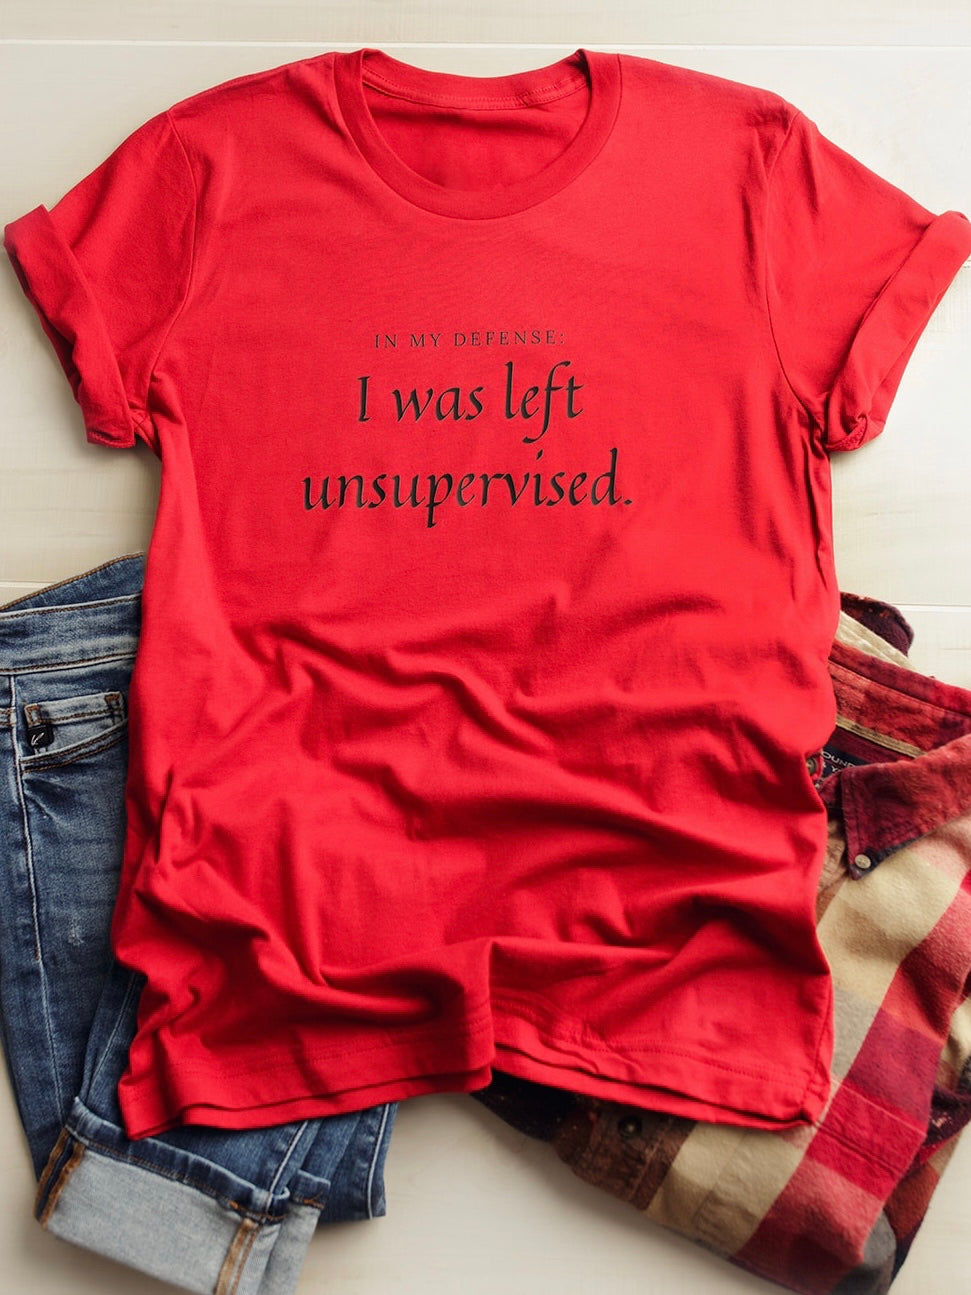 Red Bella Canvas Tee that says In My Defense: I was left unsupervised.